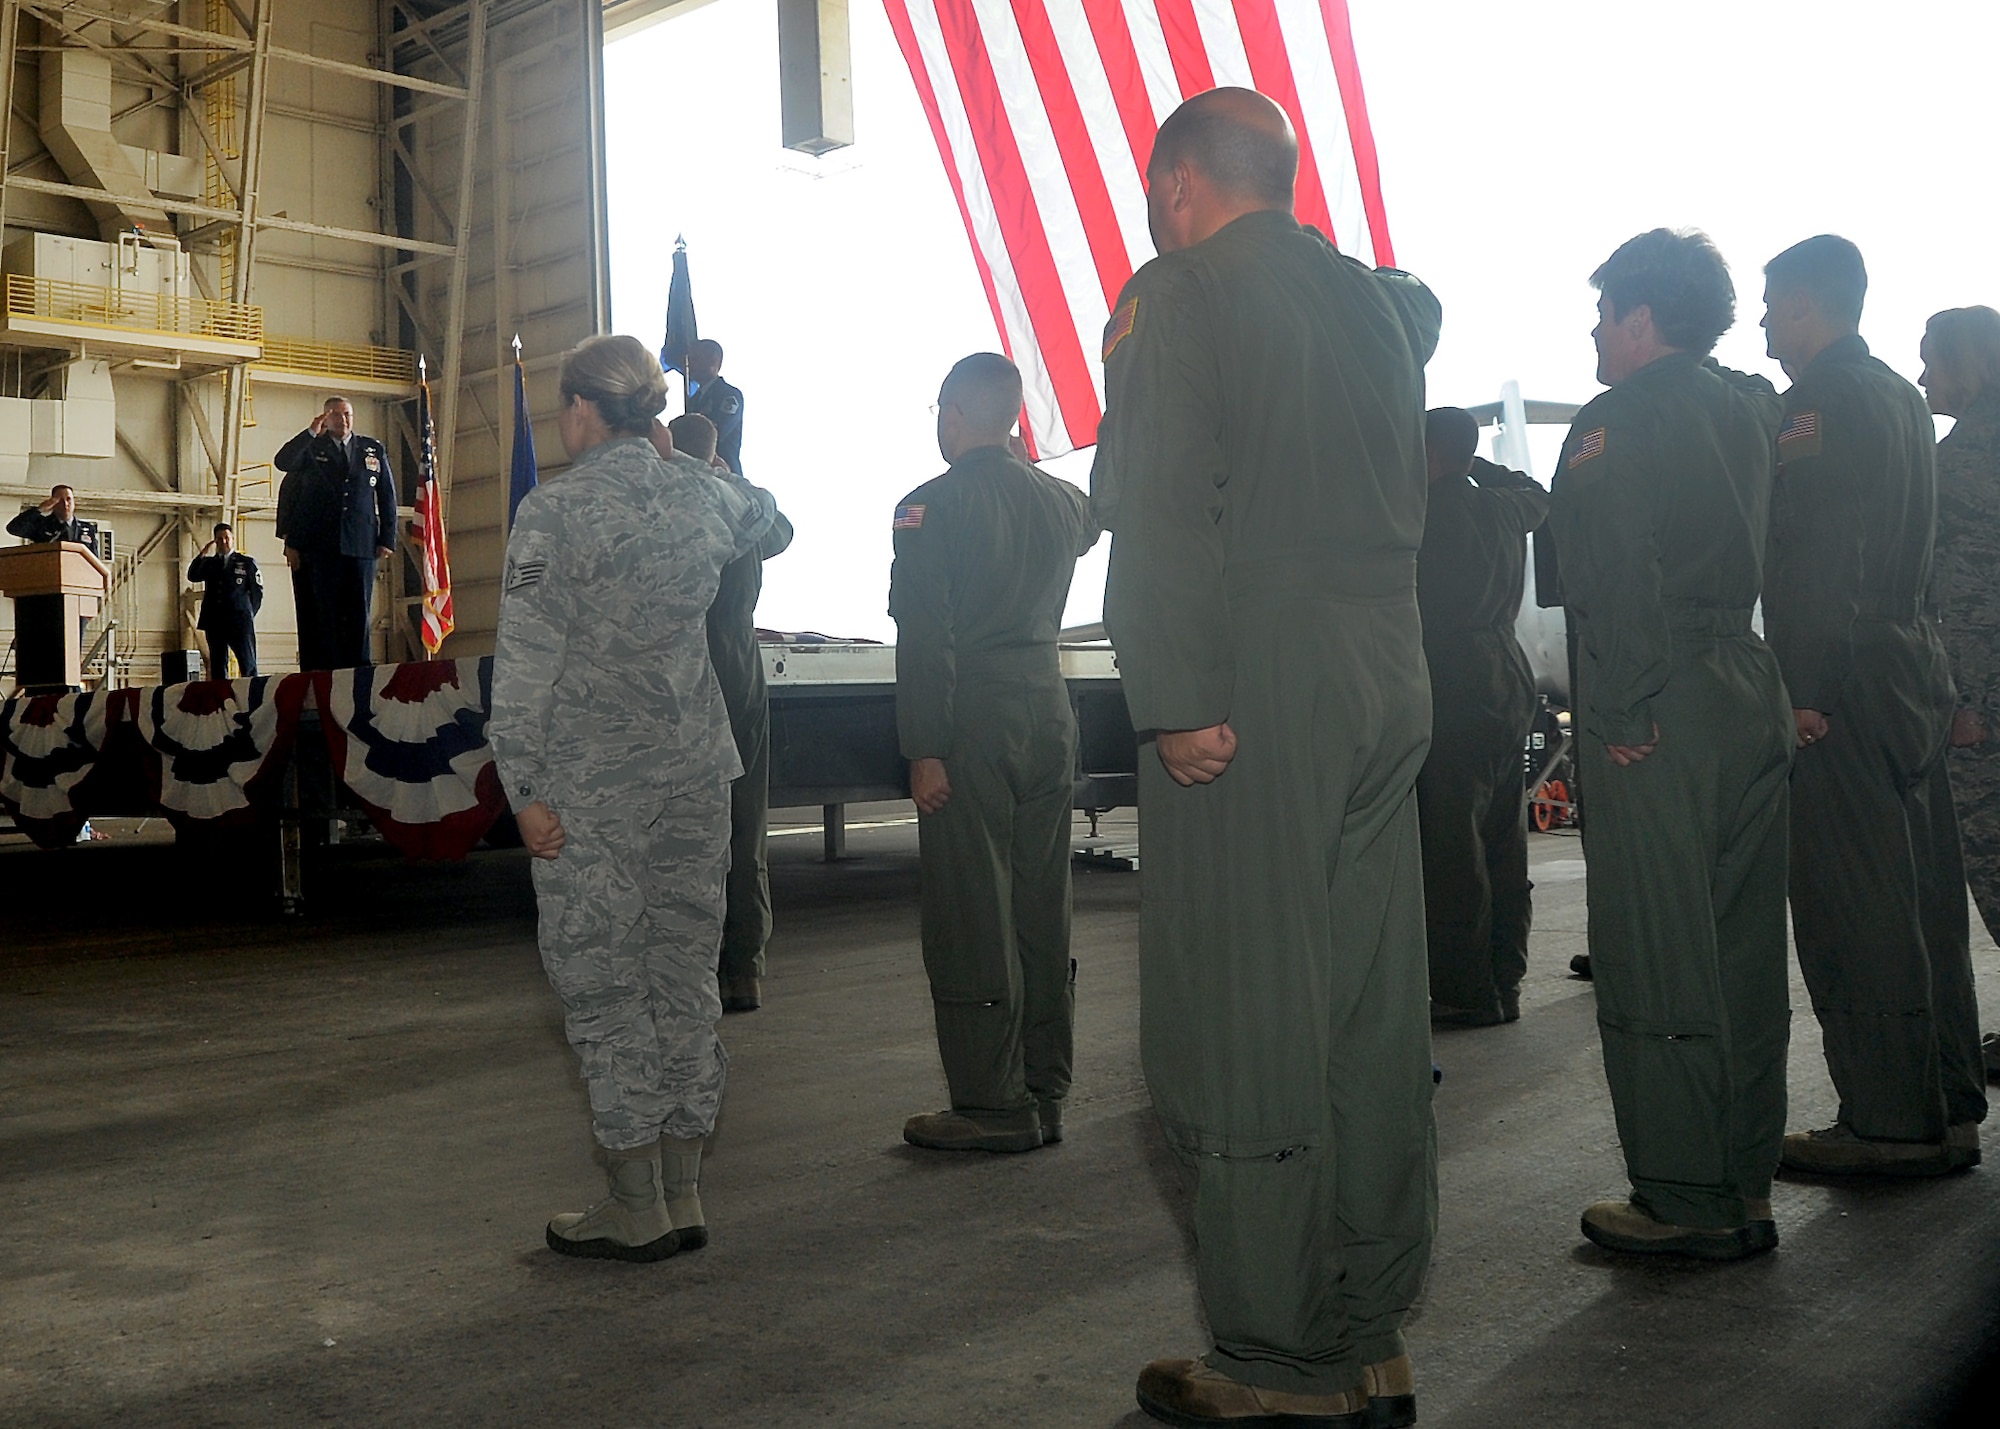 ALTUS AIR FORCE BASE, Okla. – Lt. Col. Jonathan M. Philebaum, 730th Air Mobility Training Squadron commander, receives his first salute from members of the 730th AMTS during the squadron reactivation and assumption of command ceremony at hangar 517 June 13, 2012. The 730th AMTS mission is to train C-17 Globemaster III and KC-135 Stratotanker aircrews alongside their fellow active-duty Airmen at Altus AFB. (U.S. Air Force photo by Airman 1st Class Franklin R. Ramos / 97th Air Mobility Wing / Released)